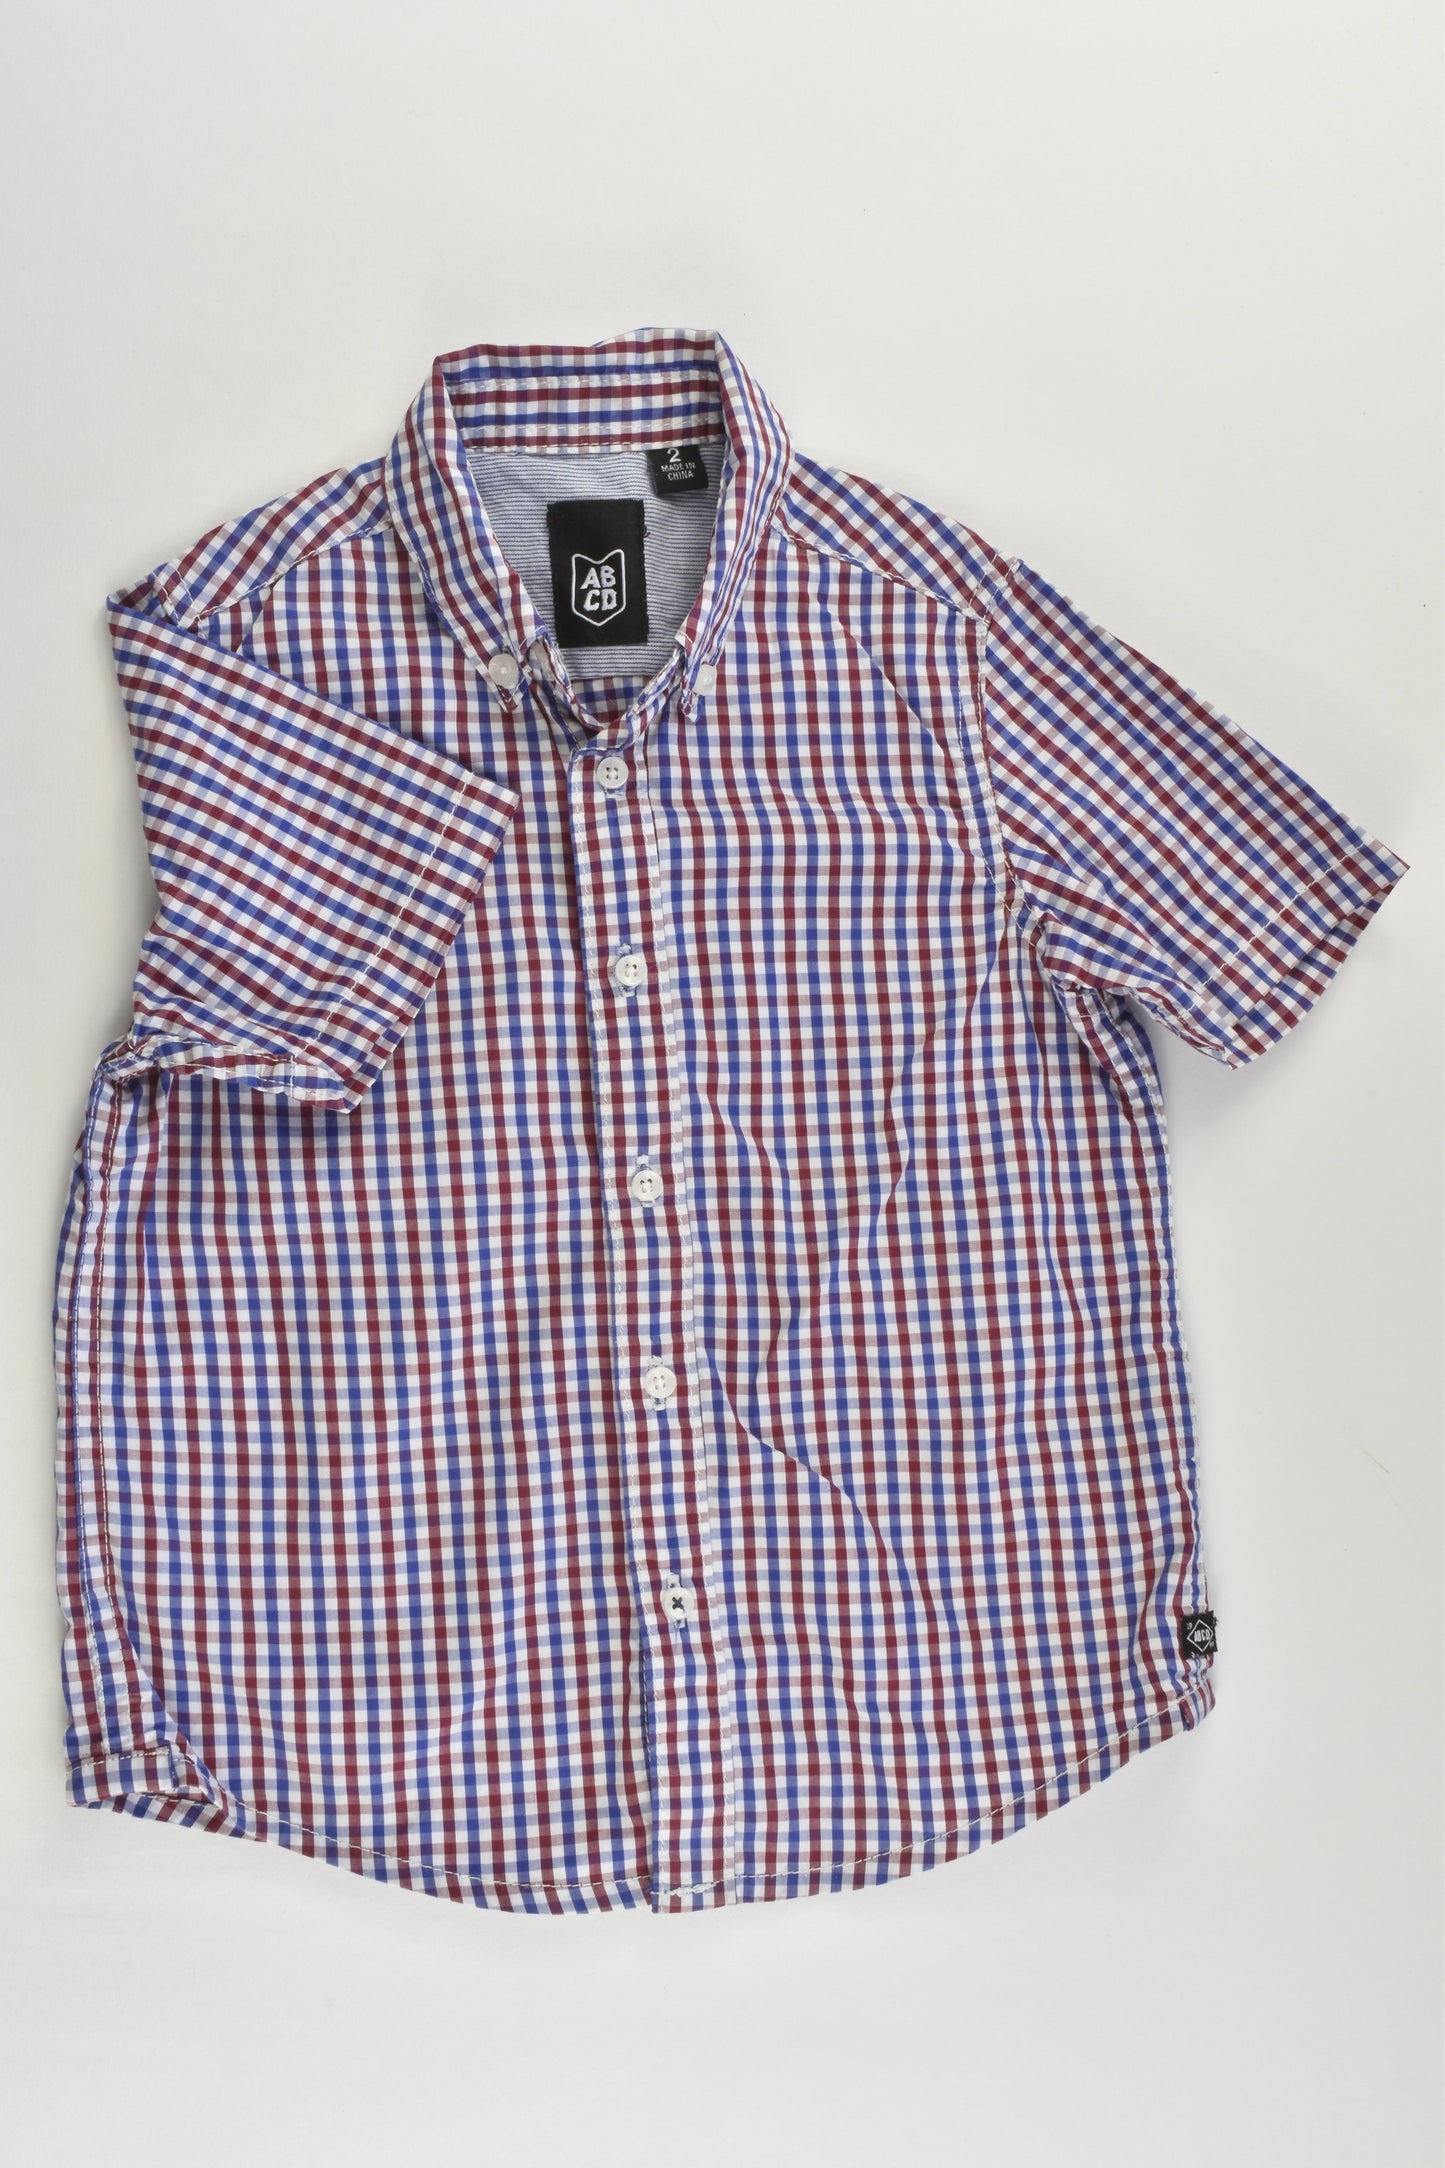 ABCD Indie Kids by Industrie Size 2 Checked Shirt